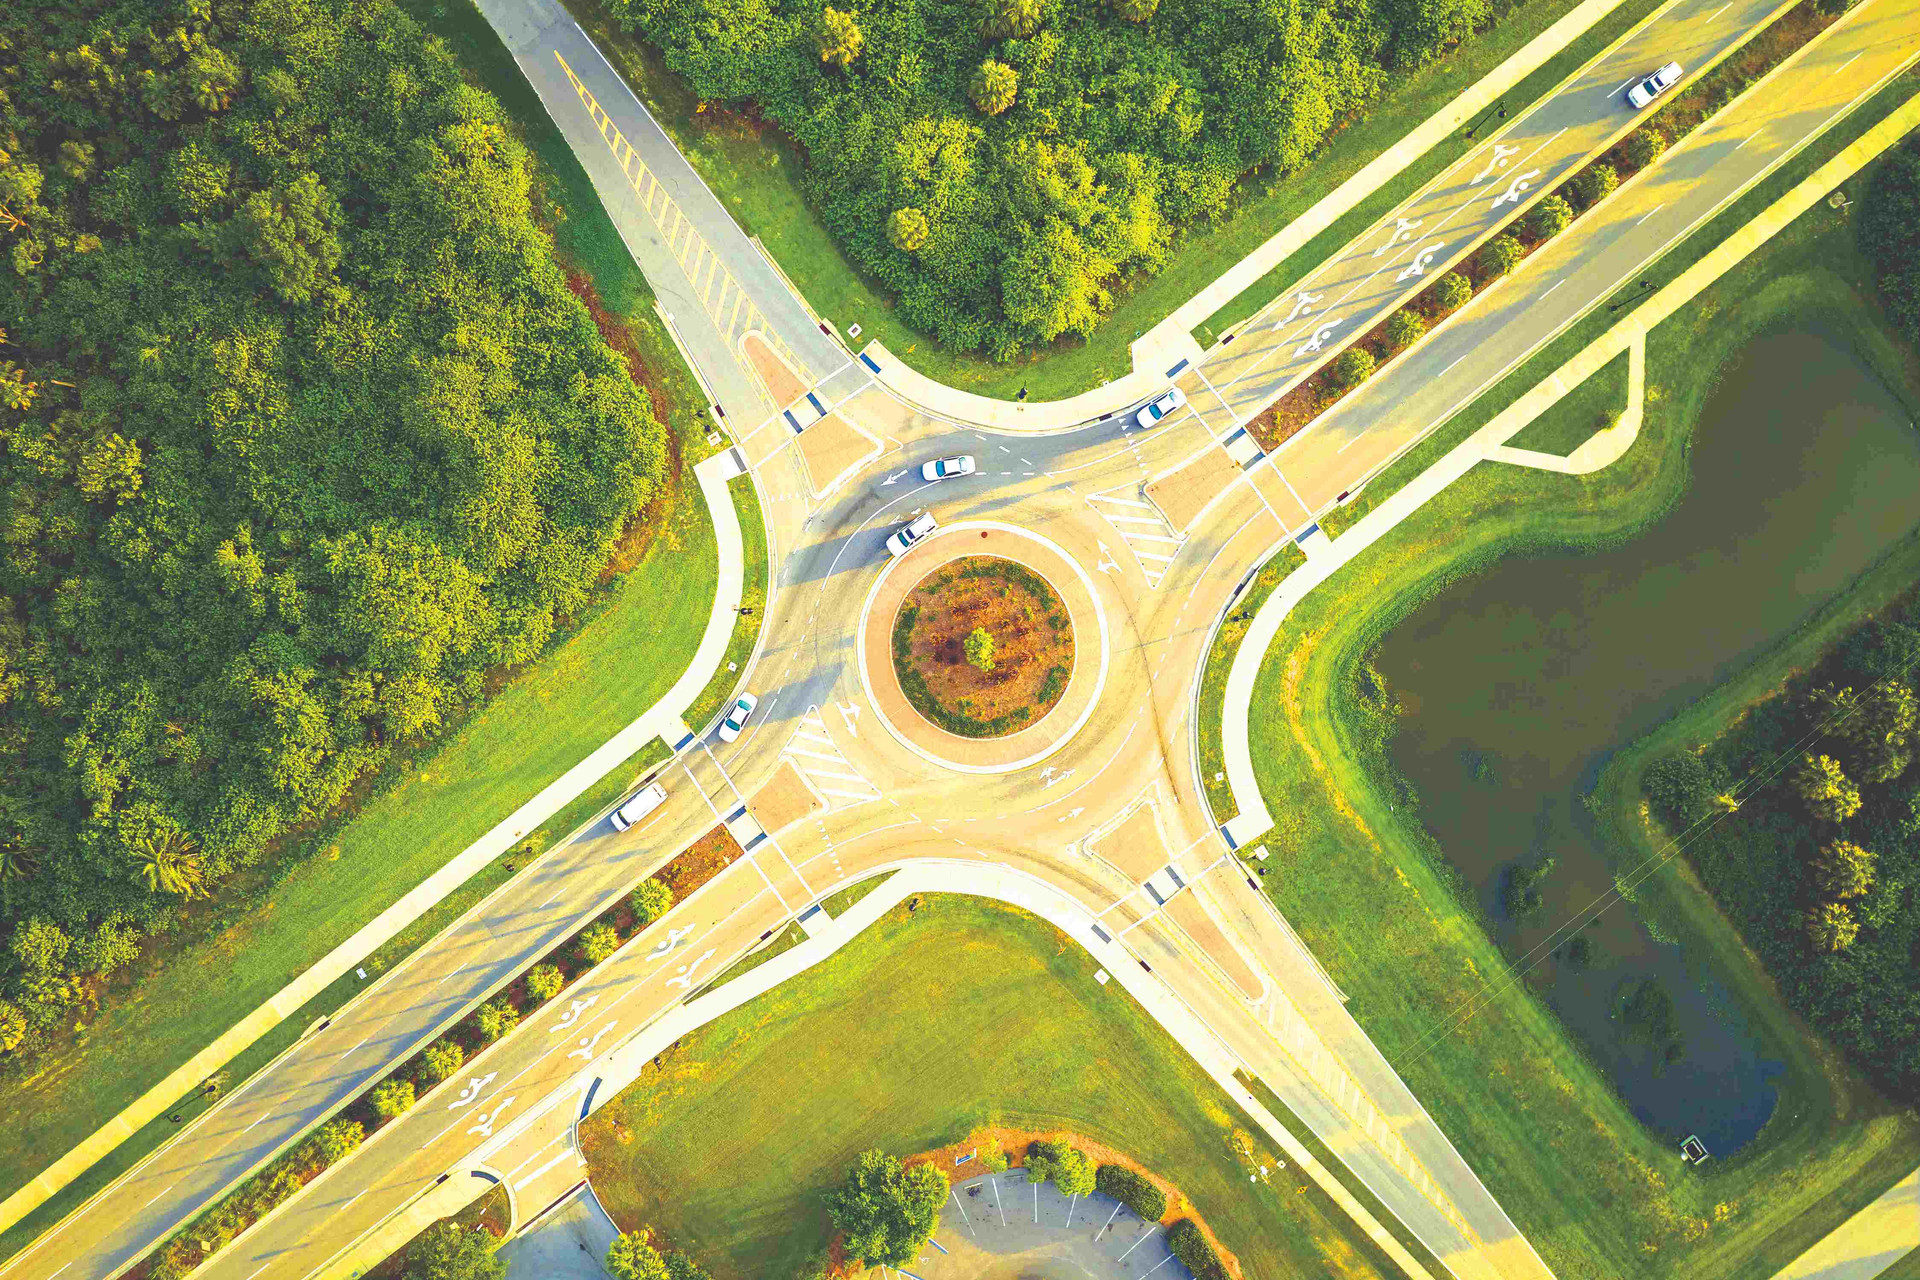 aerial-view-road-roundabout-intersection-with-moving-cars-traffic-rural-circular-transportation-crossroads-compressed.jpg